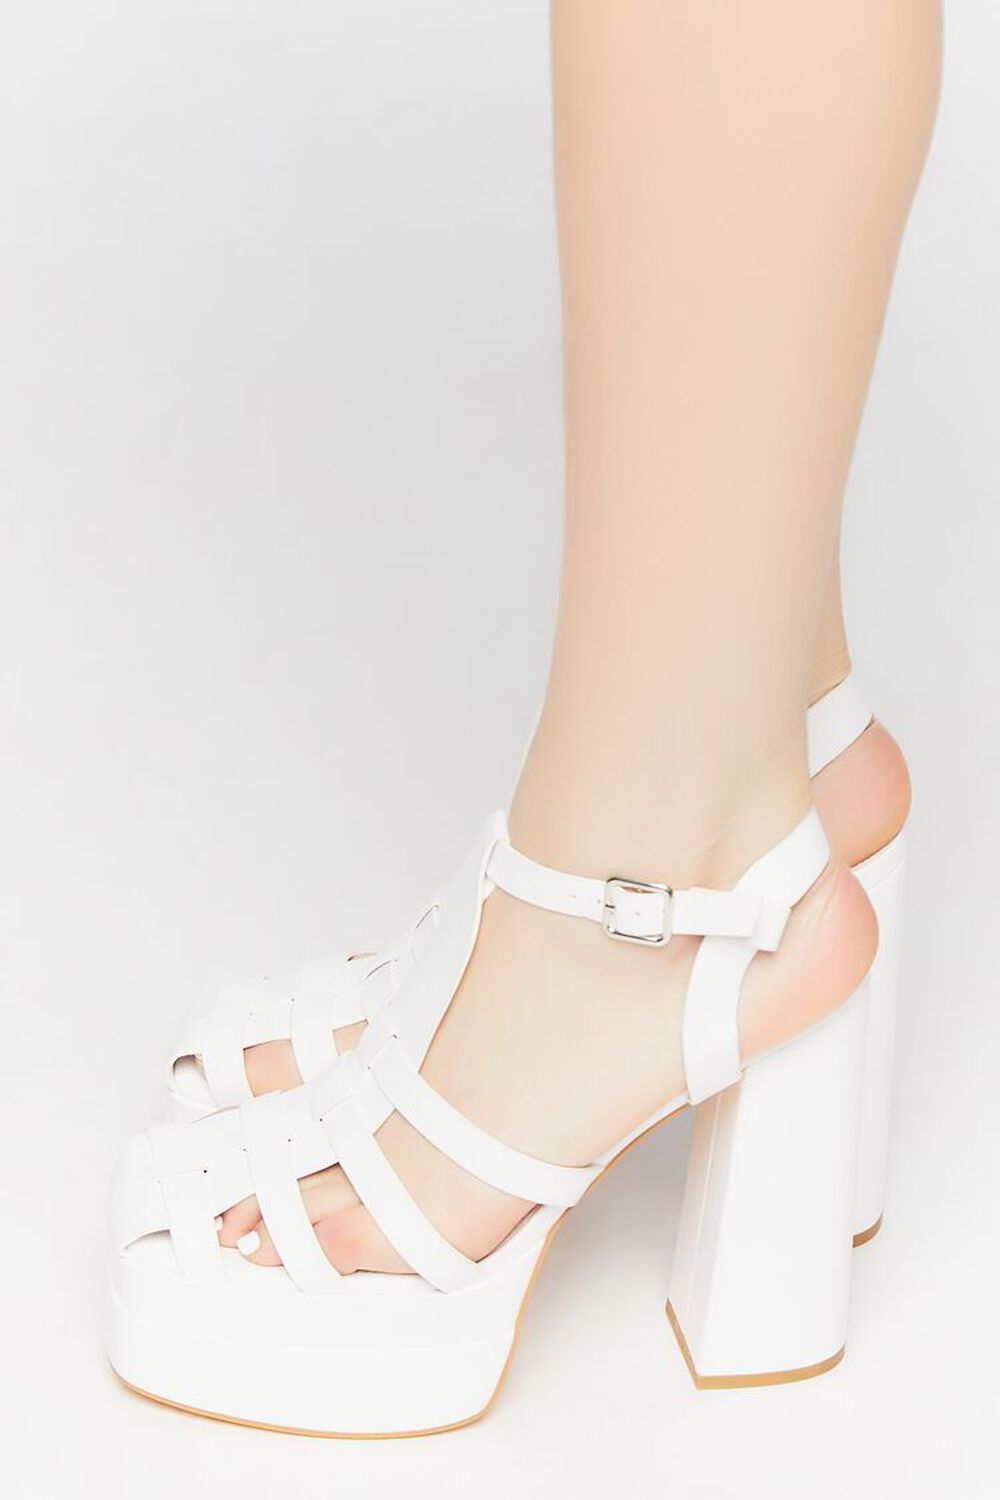 WHITE Faux Leather Caged Platform Heels, image 2